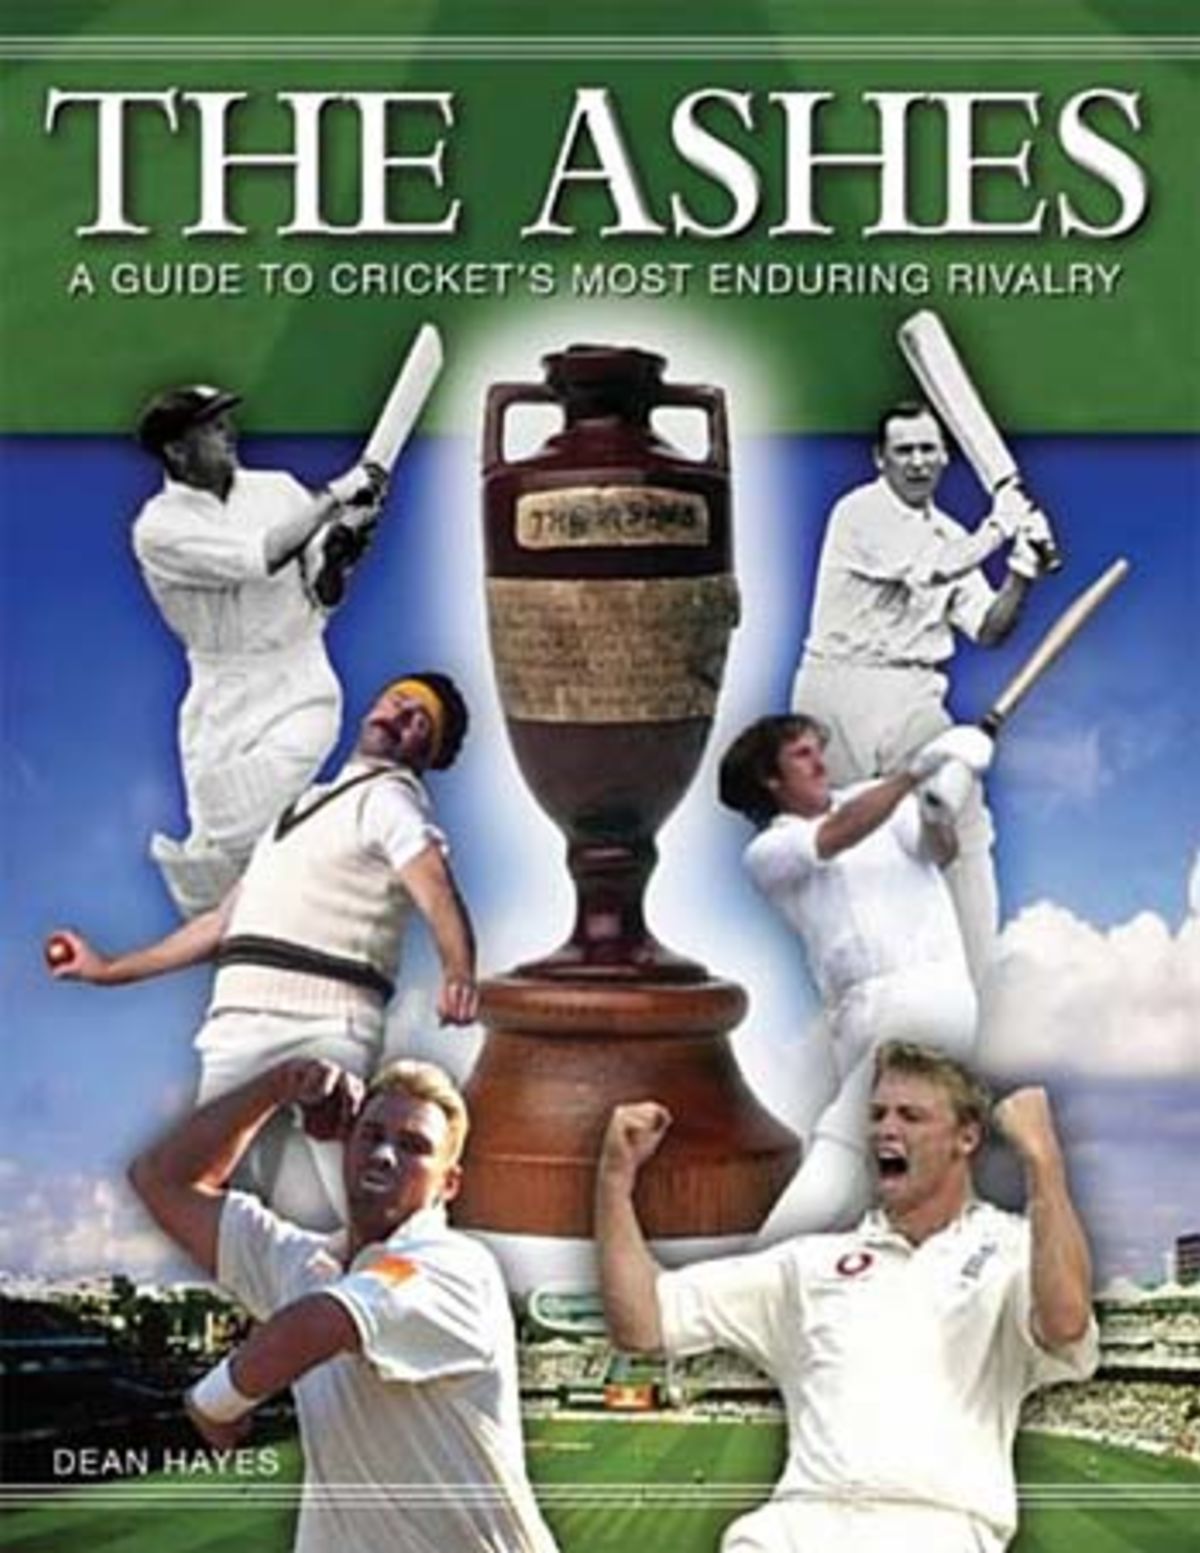 The Ashes A Guide to Cricket's Most Enduring Rivalry